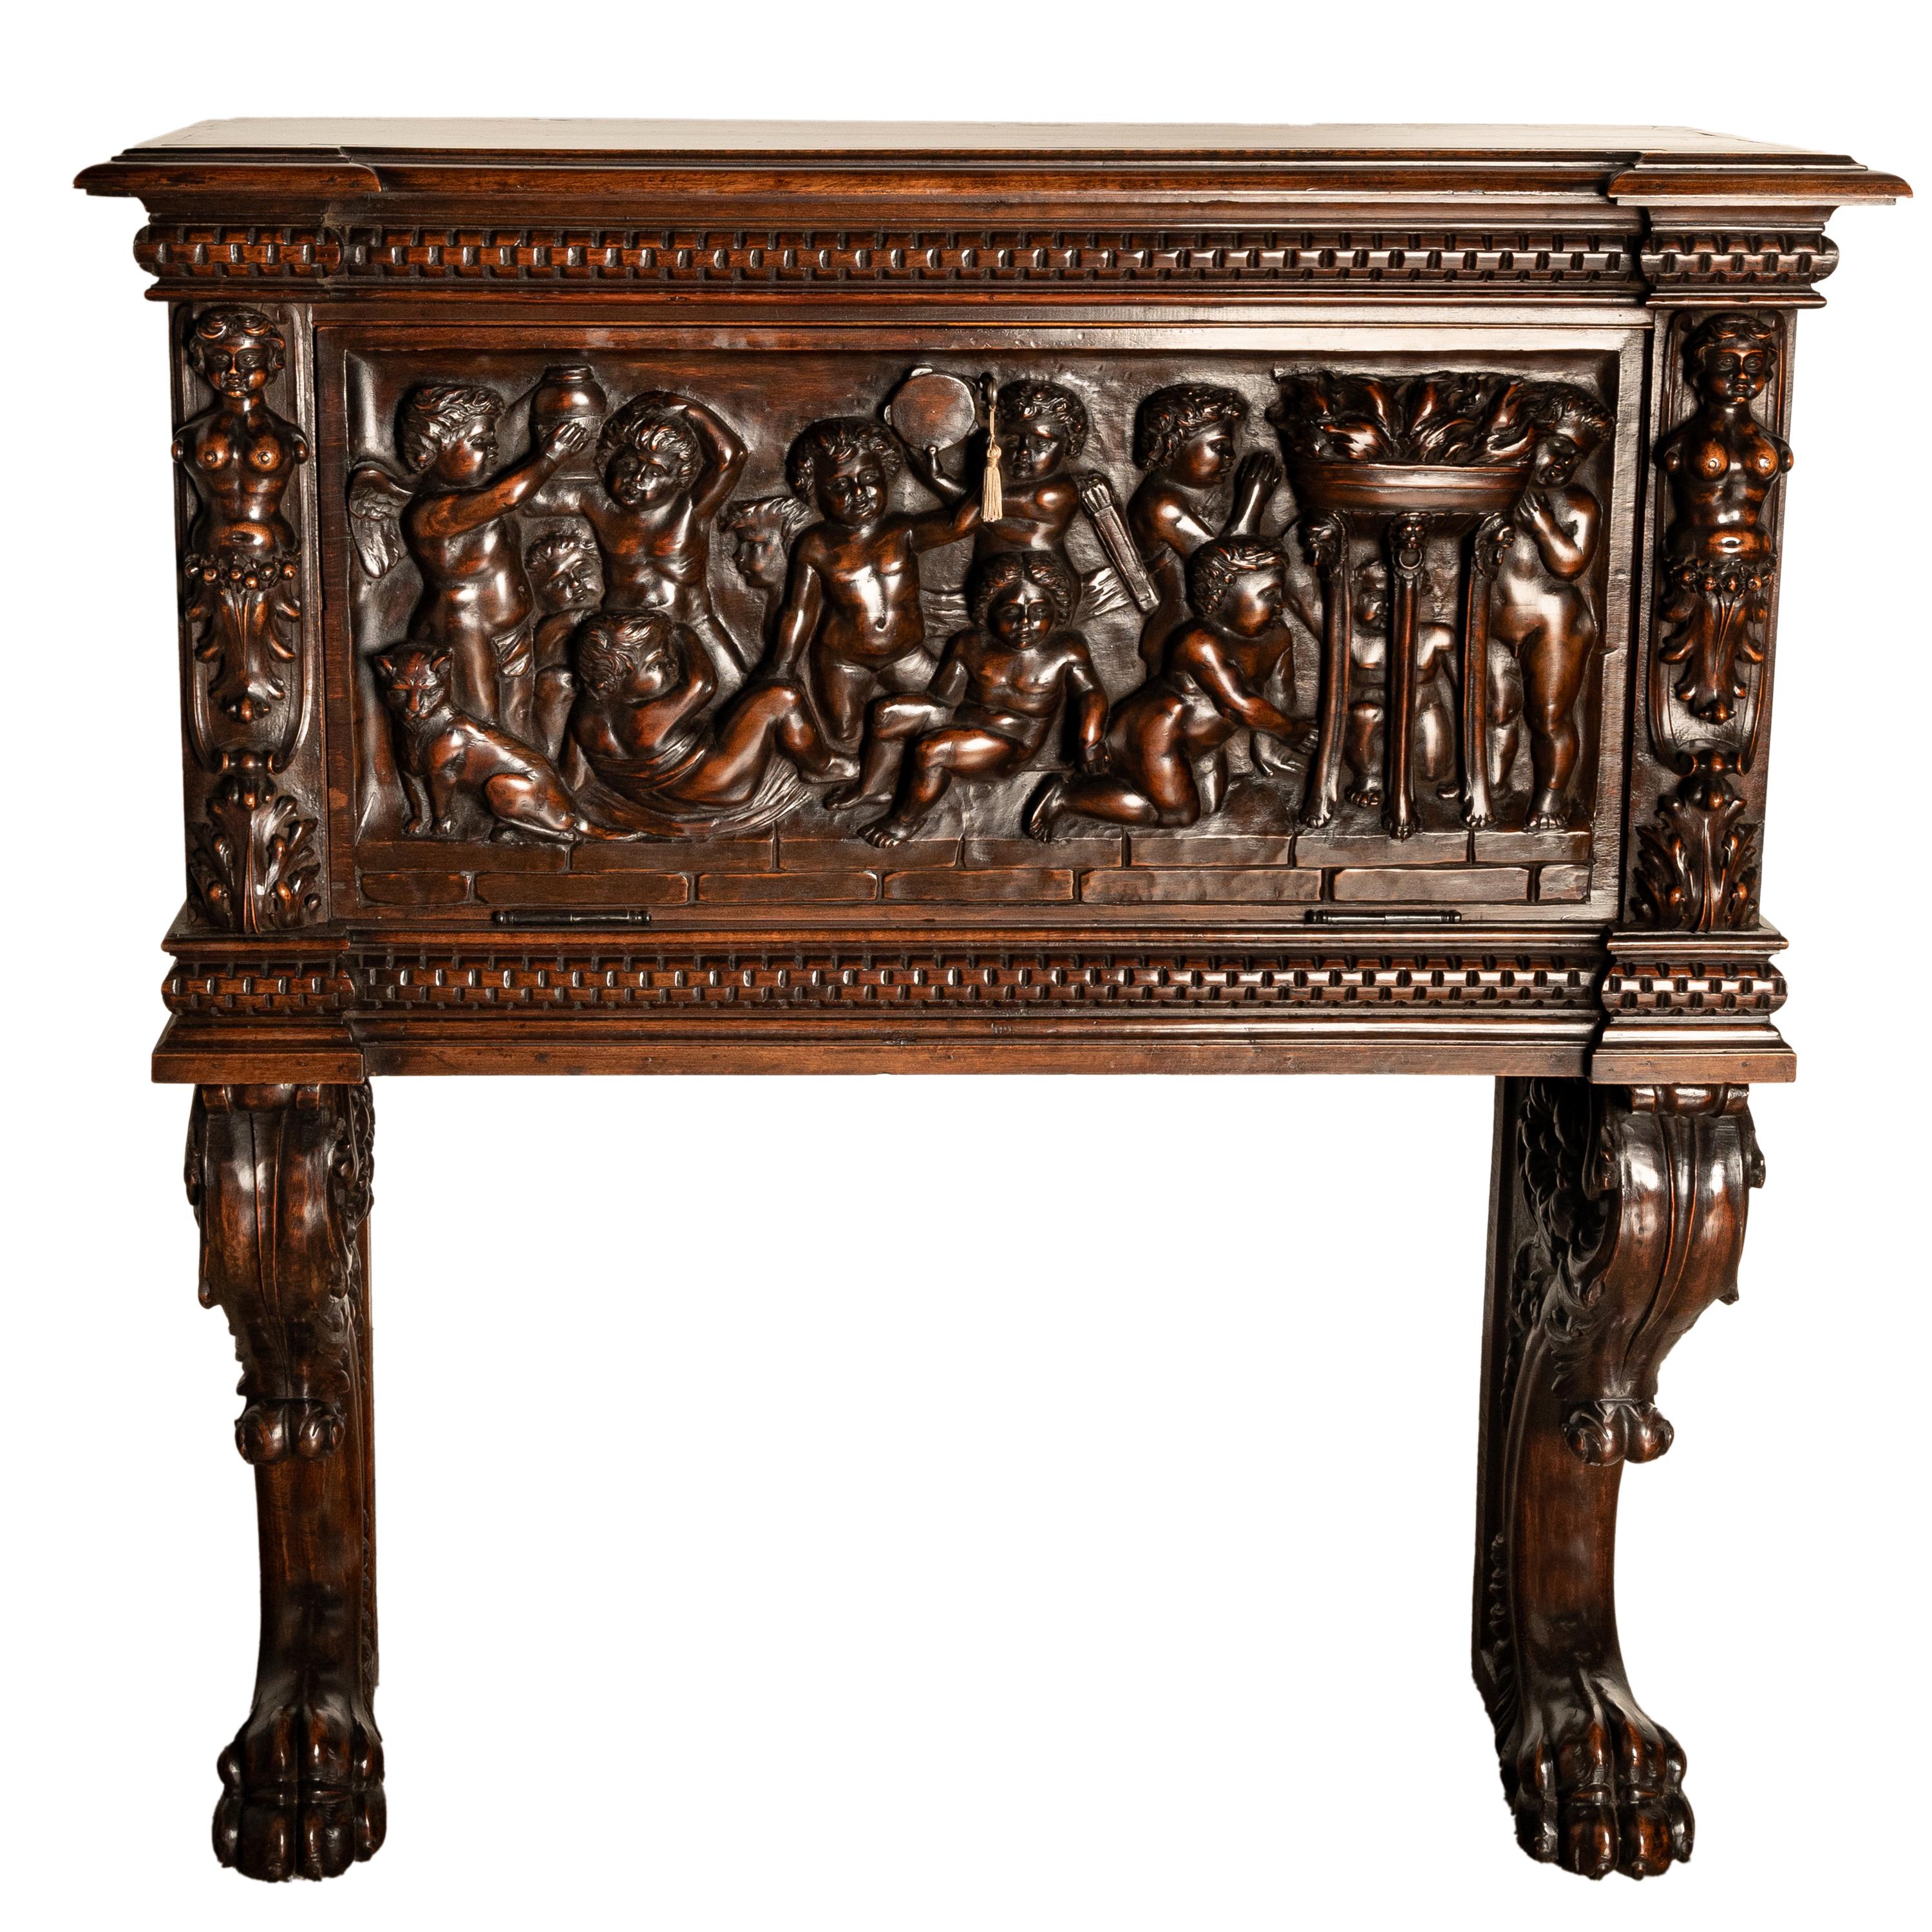 A very fine antique Italian Florentine Renaissance Revival carved cabinet on stand, circa 1880.
The cabinet has some of the finest carvings we have seen on a late 19th century cabinet, In two sections. The top with a stepped crown and a carved